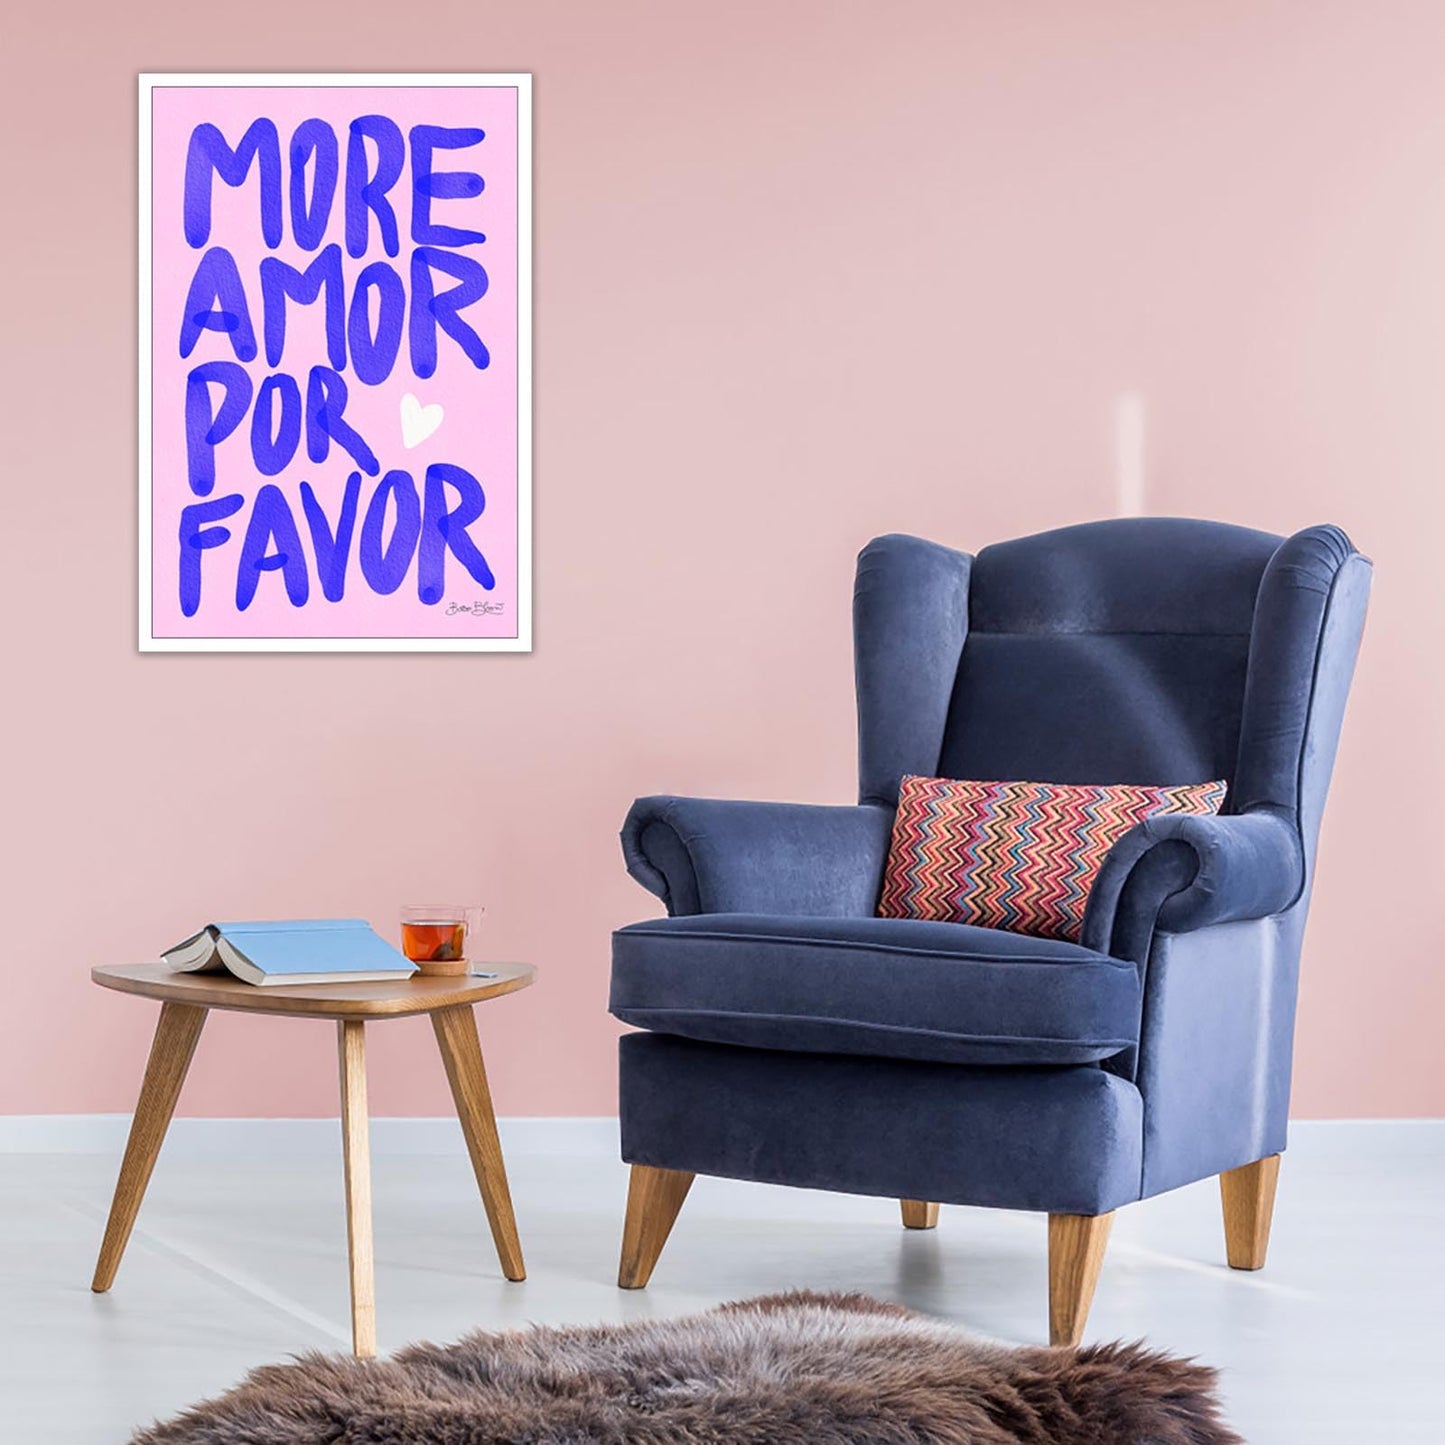 NAVIWEEK Retro Trendy More Amor Por Favor Aesthetic Canvas Wall Art Purple Maximalist Inspirational Poster Modern Colorful Eclectic Prints Painting For Home Bedroom Dorm Wall Decor 12x16in Unframed